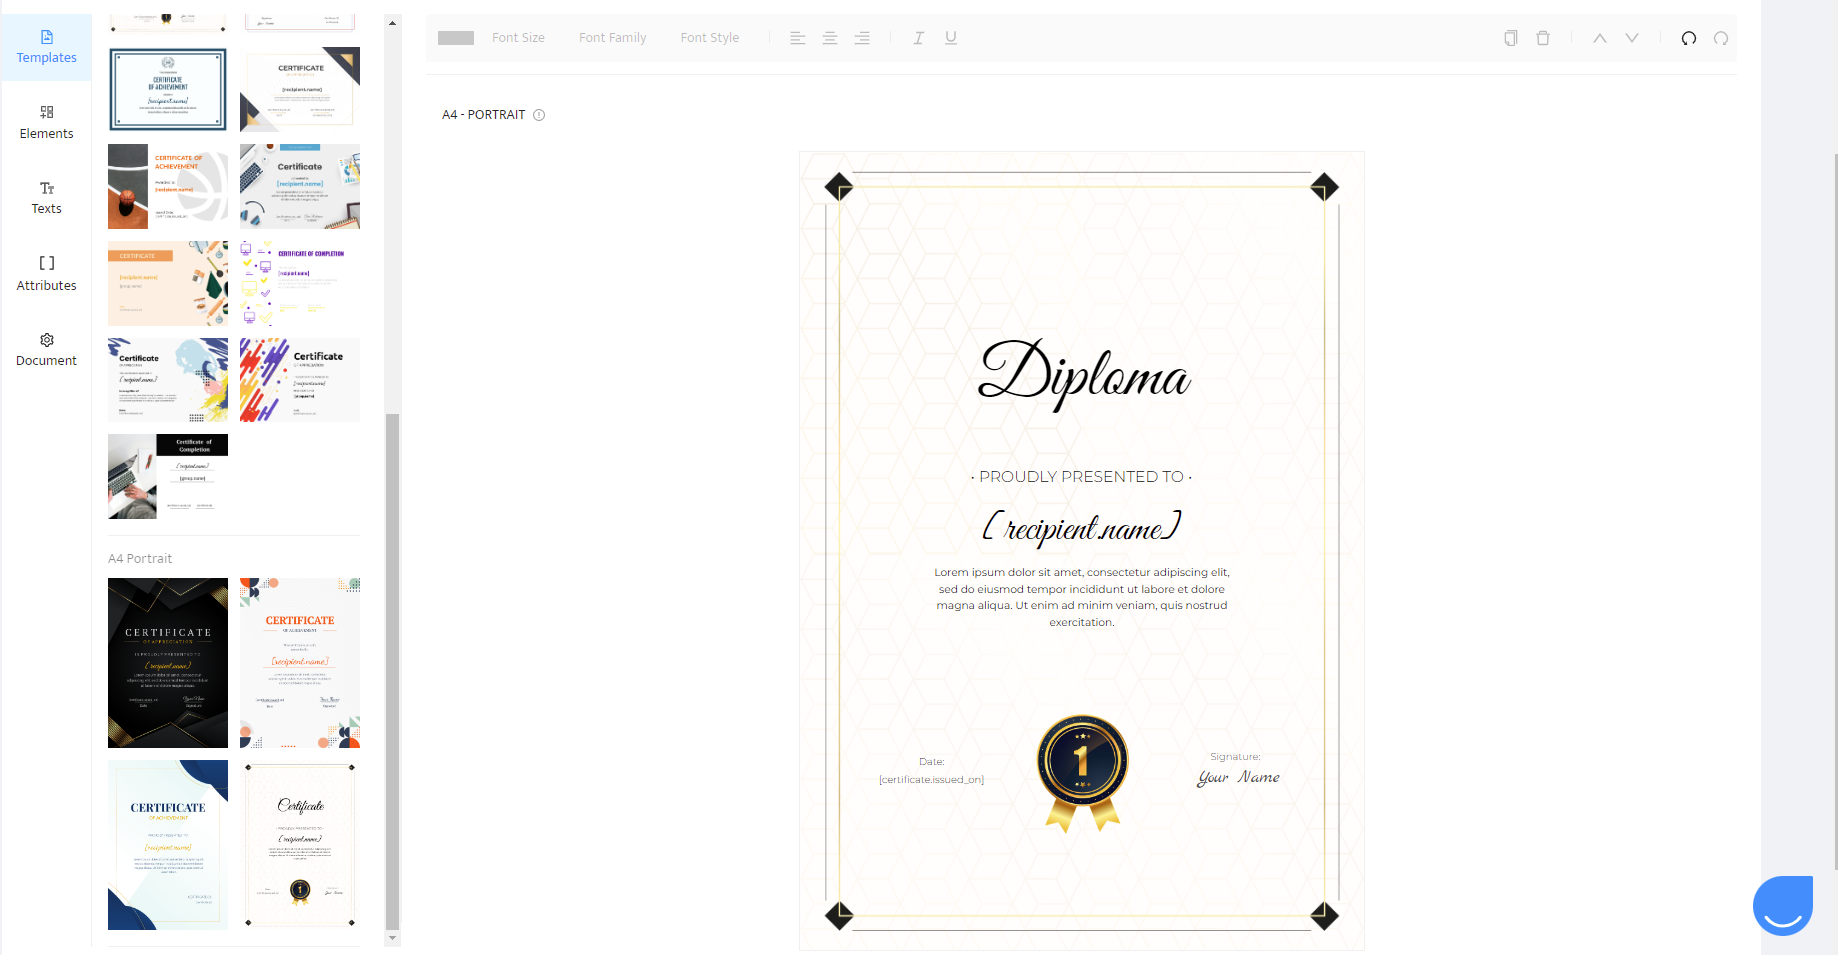 The display showing diplomas templates available on Certifier diploma generator.